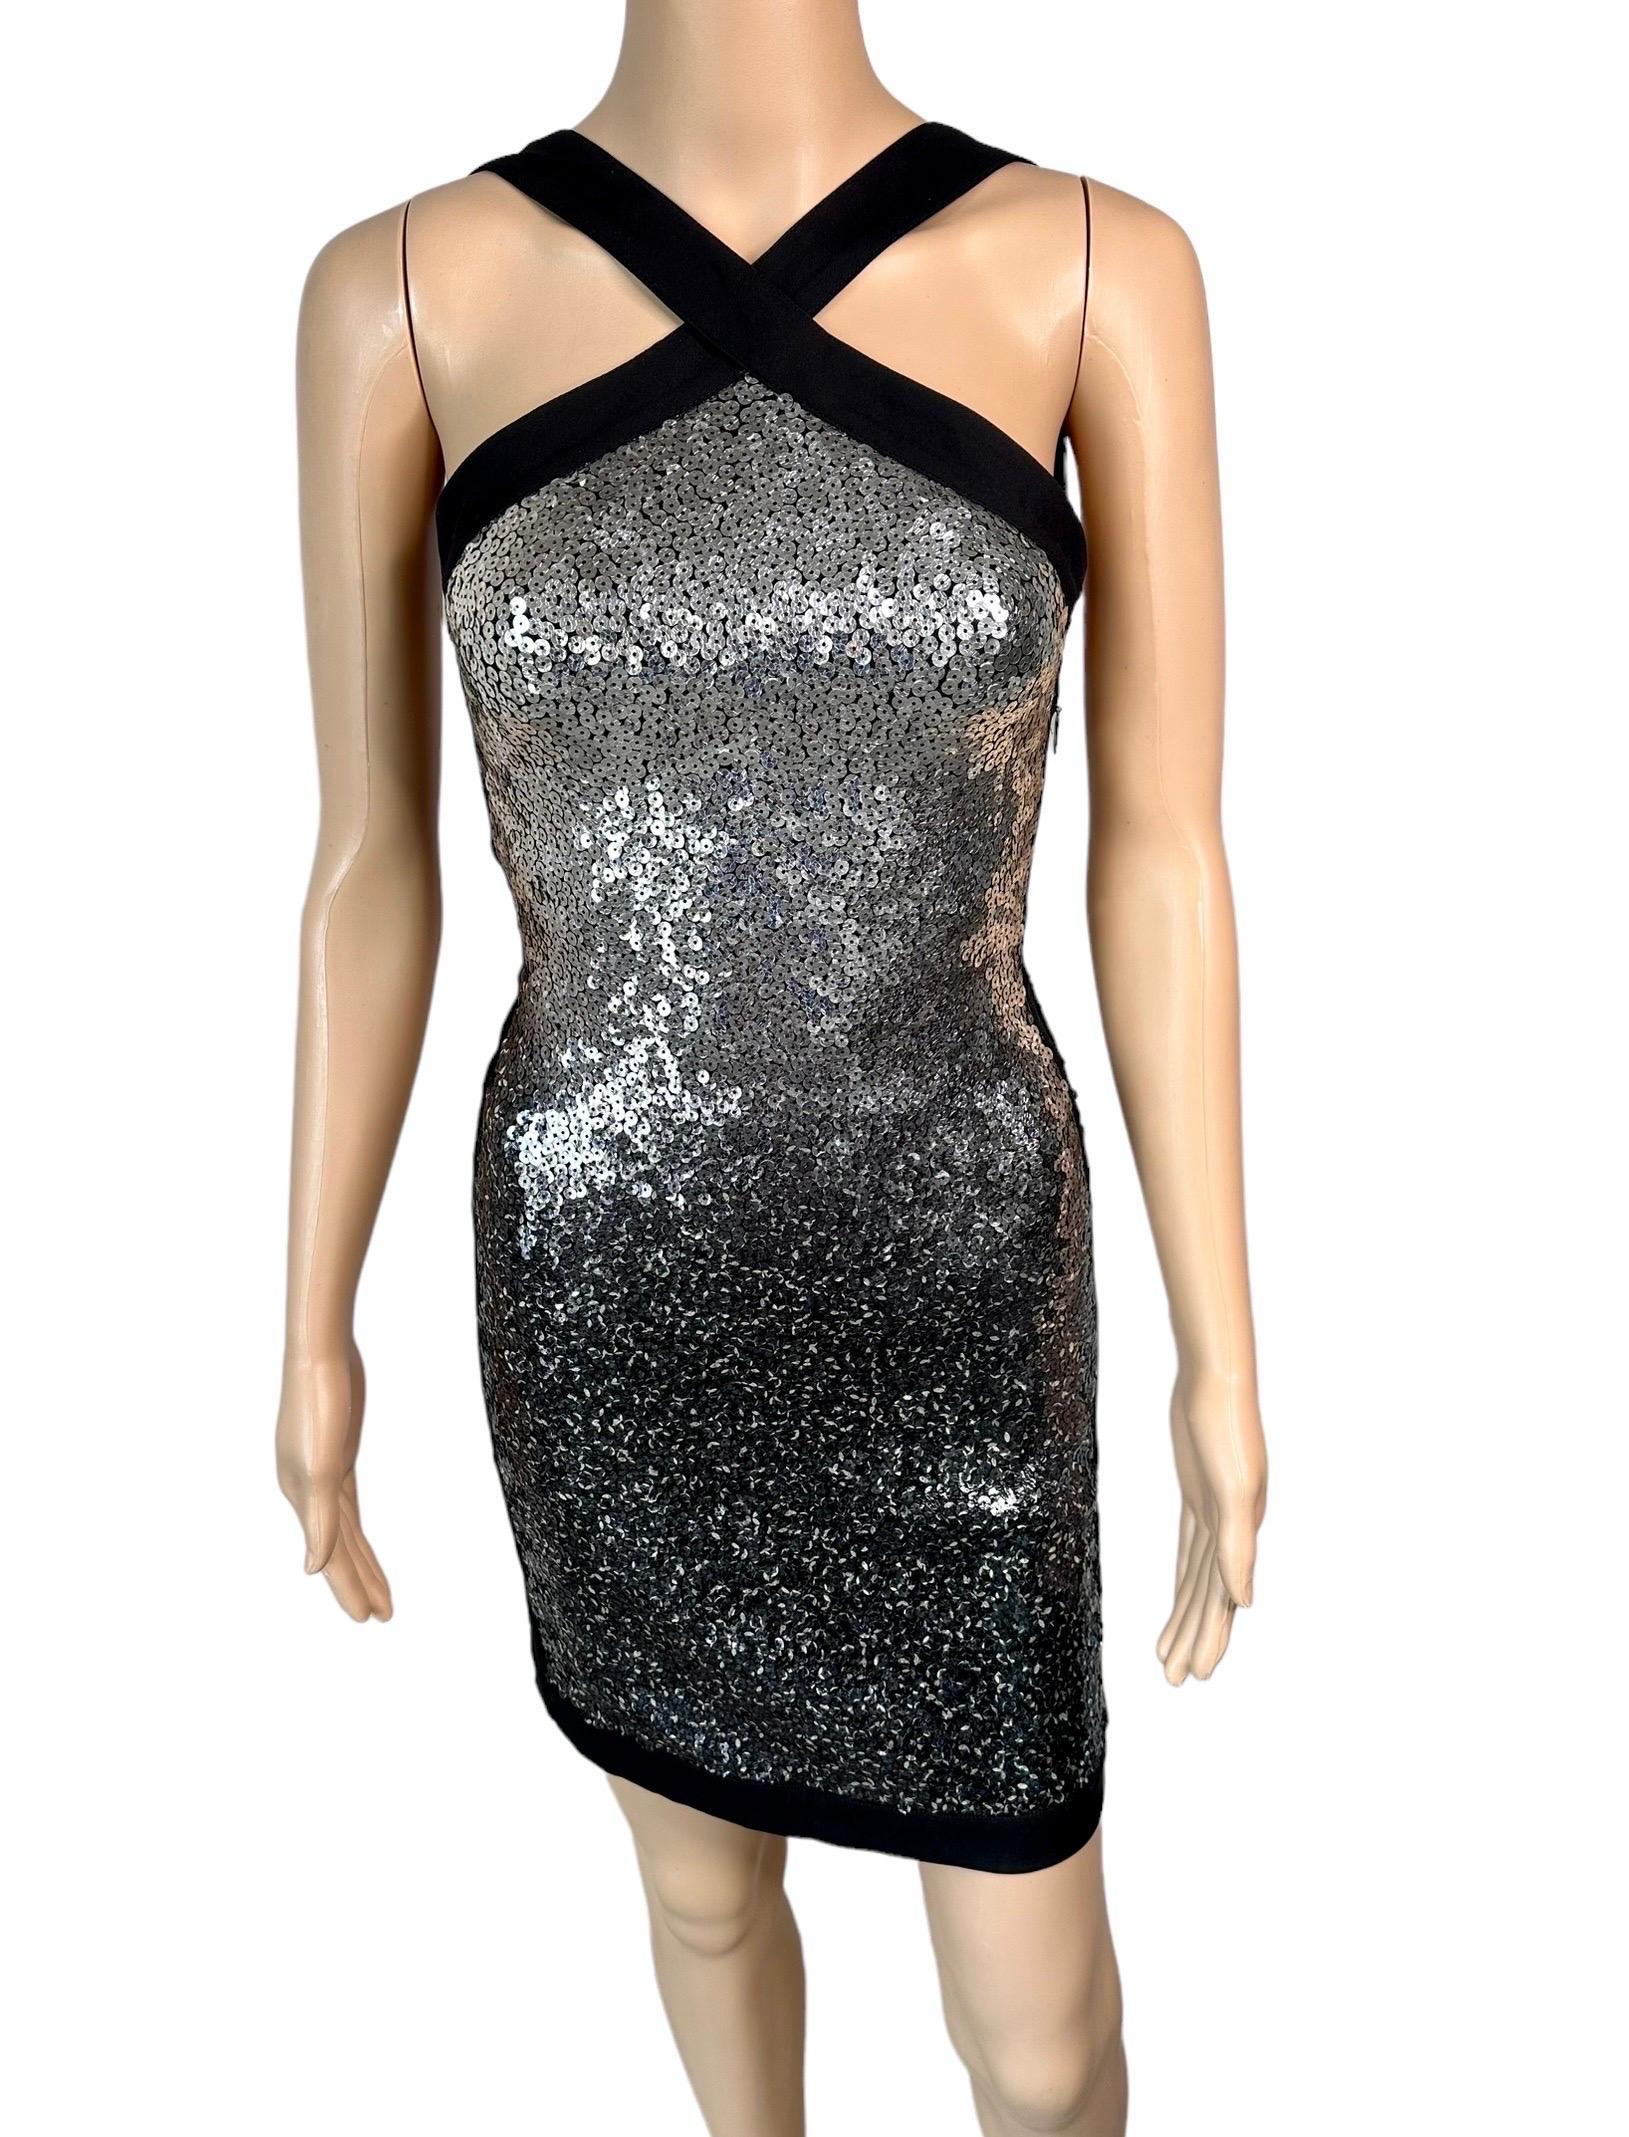 Black Roberto Cavalli S/S 2008 Runway Sequin Embellished Ombre Backless Mini Dress For Sale